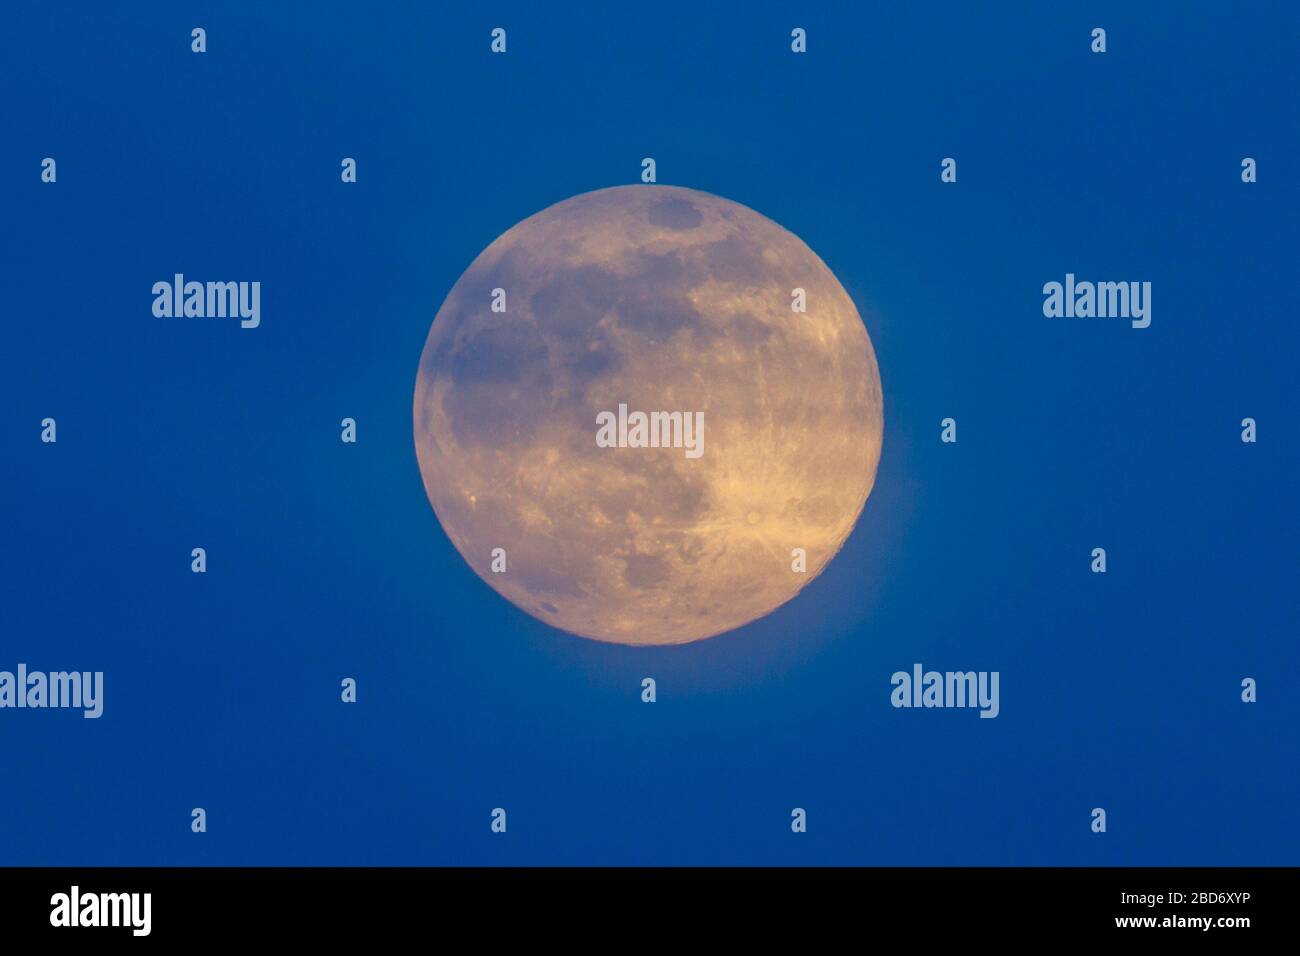 Hailsham, UK. 7th Apr 2020. UK weather. Light cloud cover this evening allowed for good views of this months full pink supermoon over Hailsham. Hailsham, East Sussex, UK. Credit: Ed Brown/Alamy Live News Stock Photo